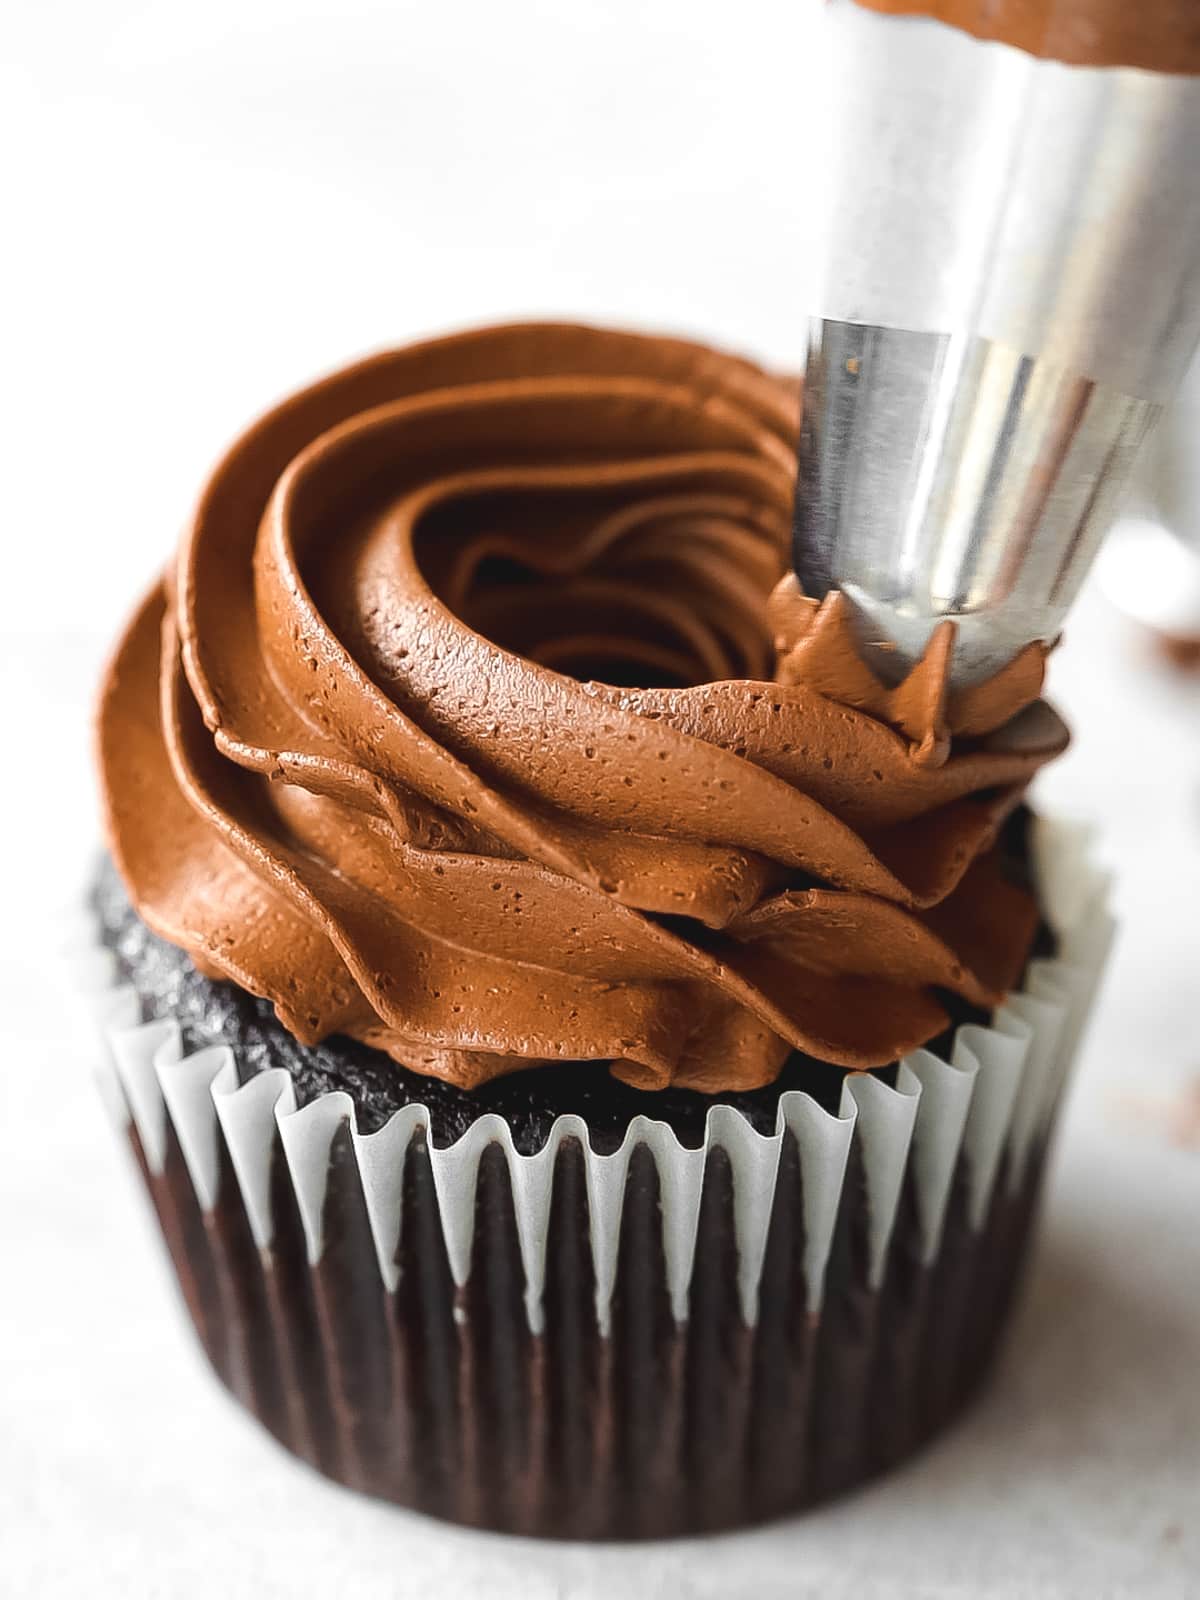 piping ganache frosting onto a chocolate cupcake.